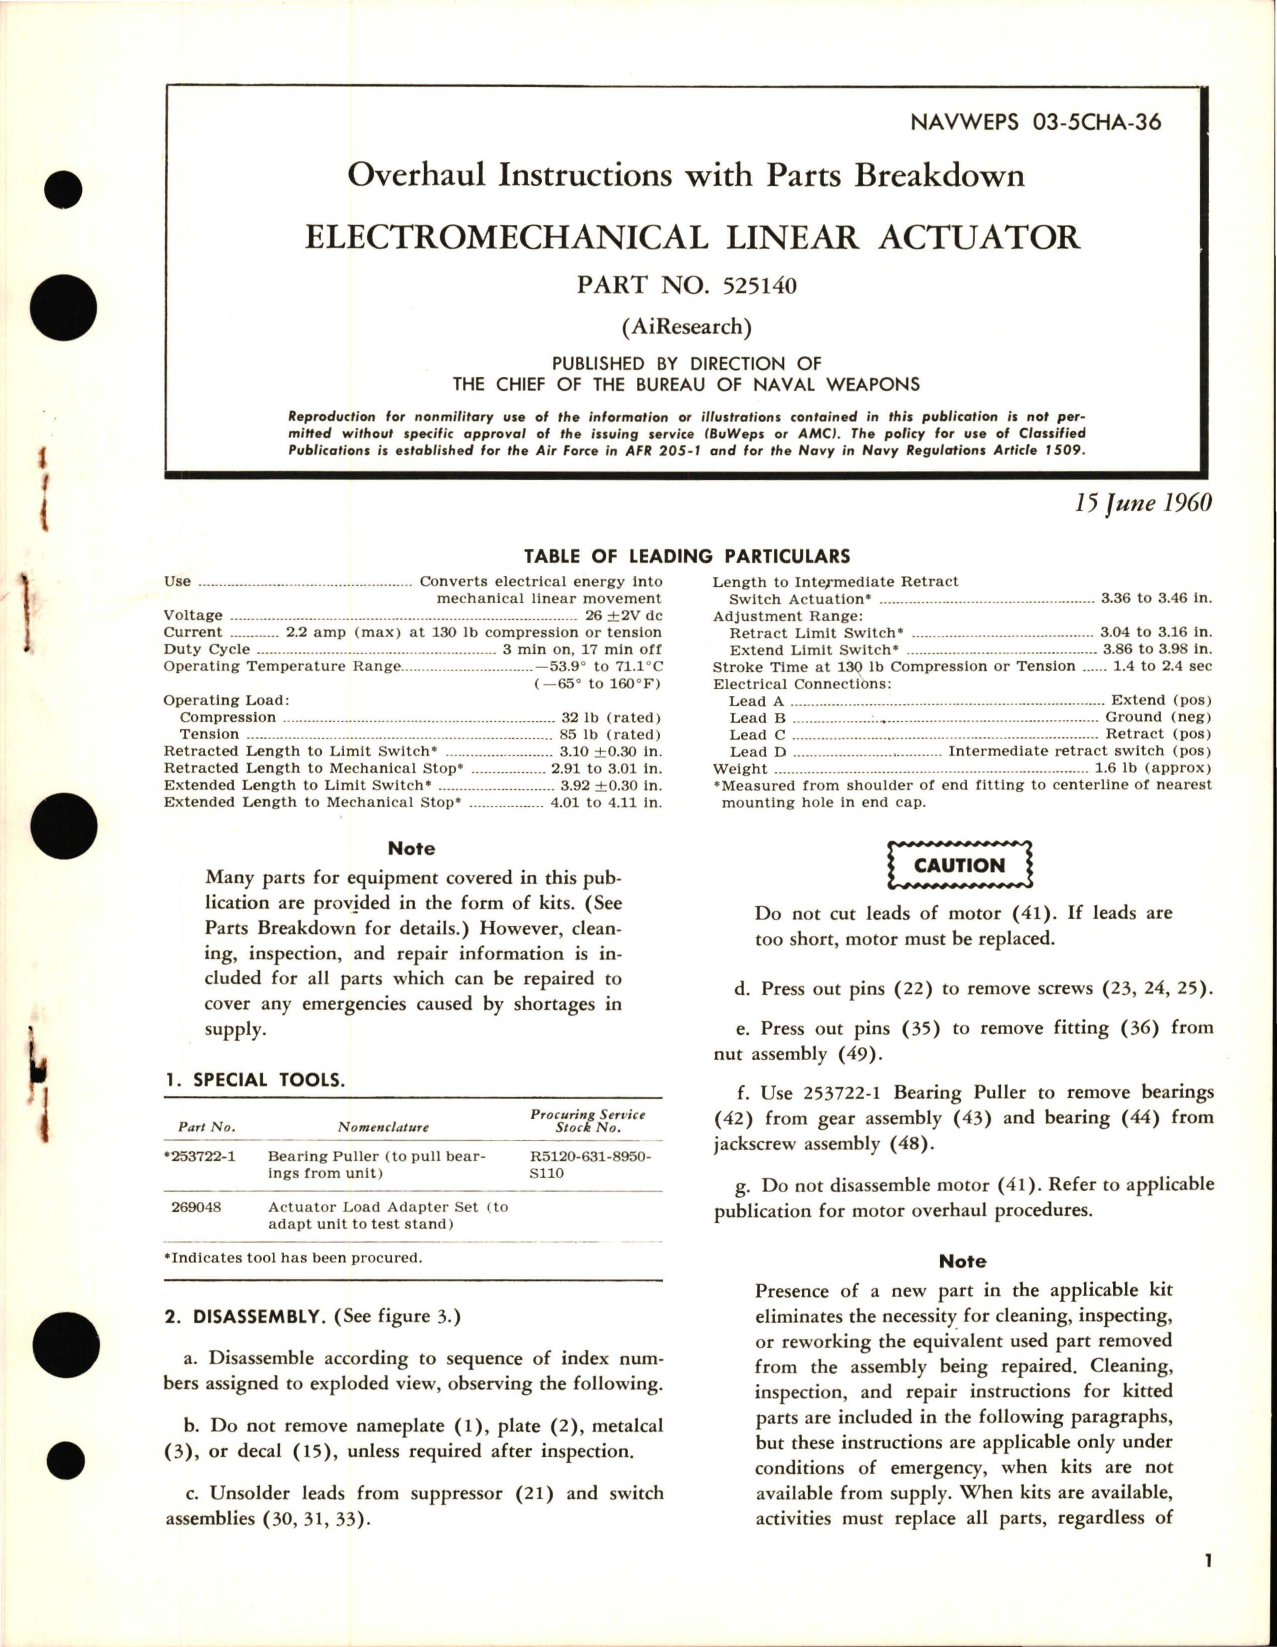 Sample page 1 from AirCorps Library document: Overhaul Instructions with Parts Breakdown for Electromechanical Linear Actuator - Part 525140 